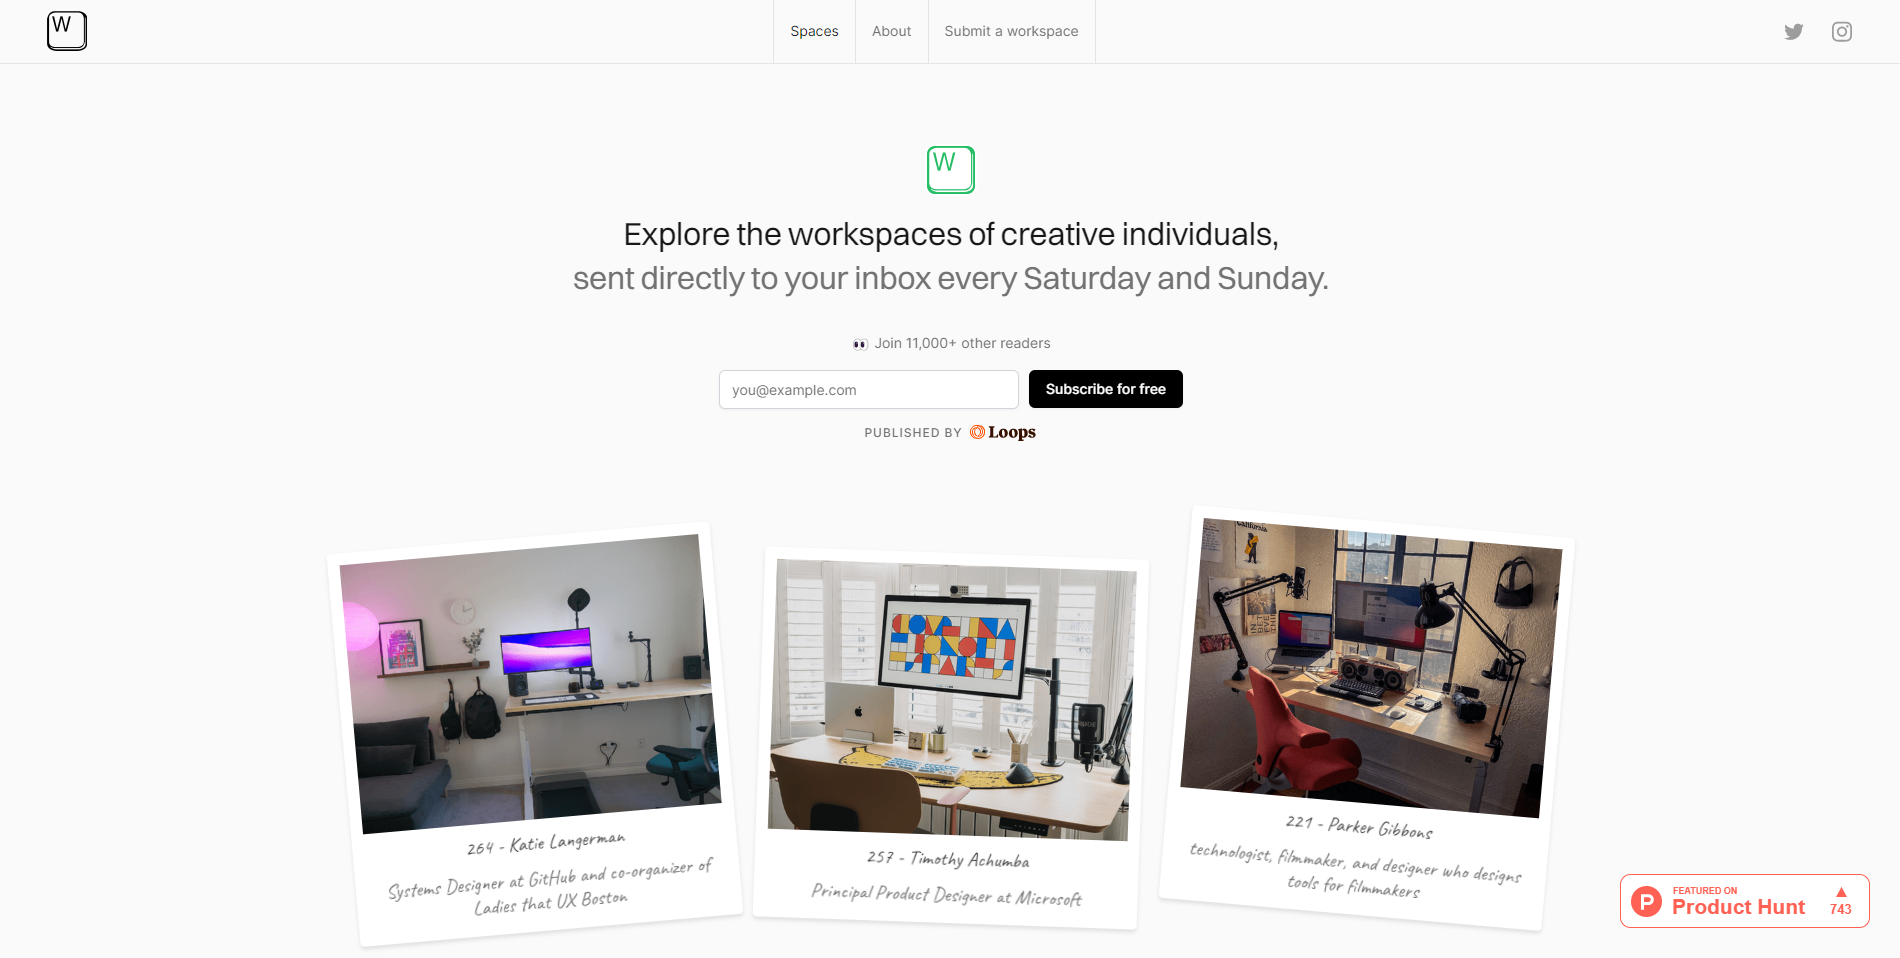 An image of the updated landing page of Workspaces.